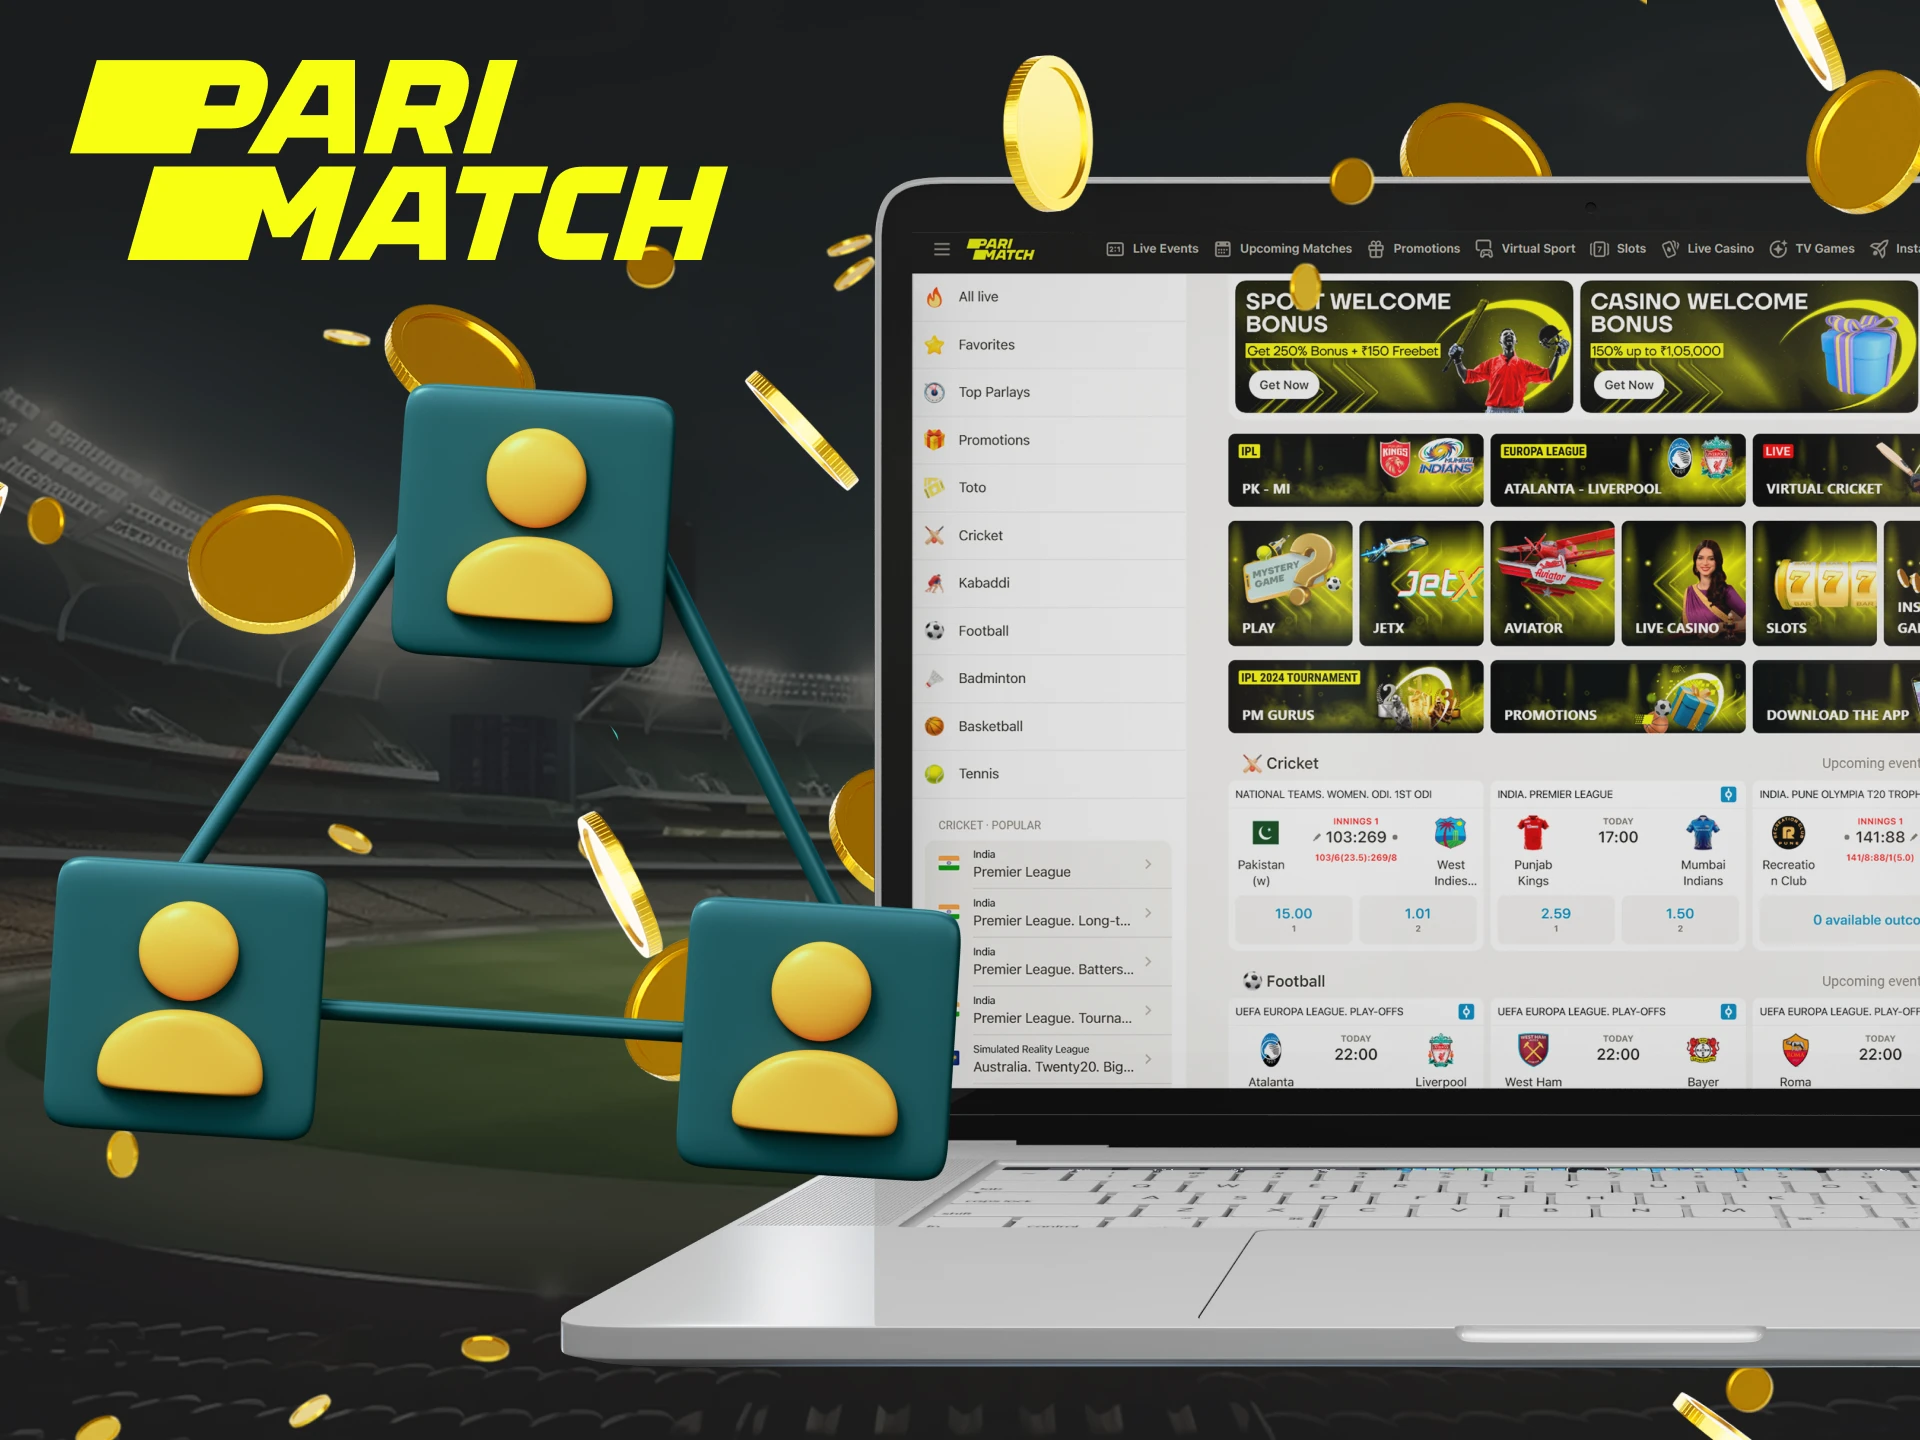 Join the Parimatch affiliate program and receive bonuses for referring people.